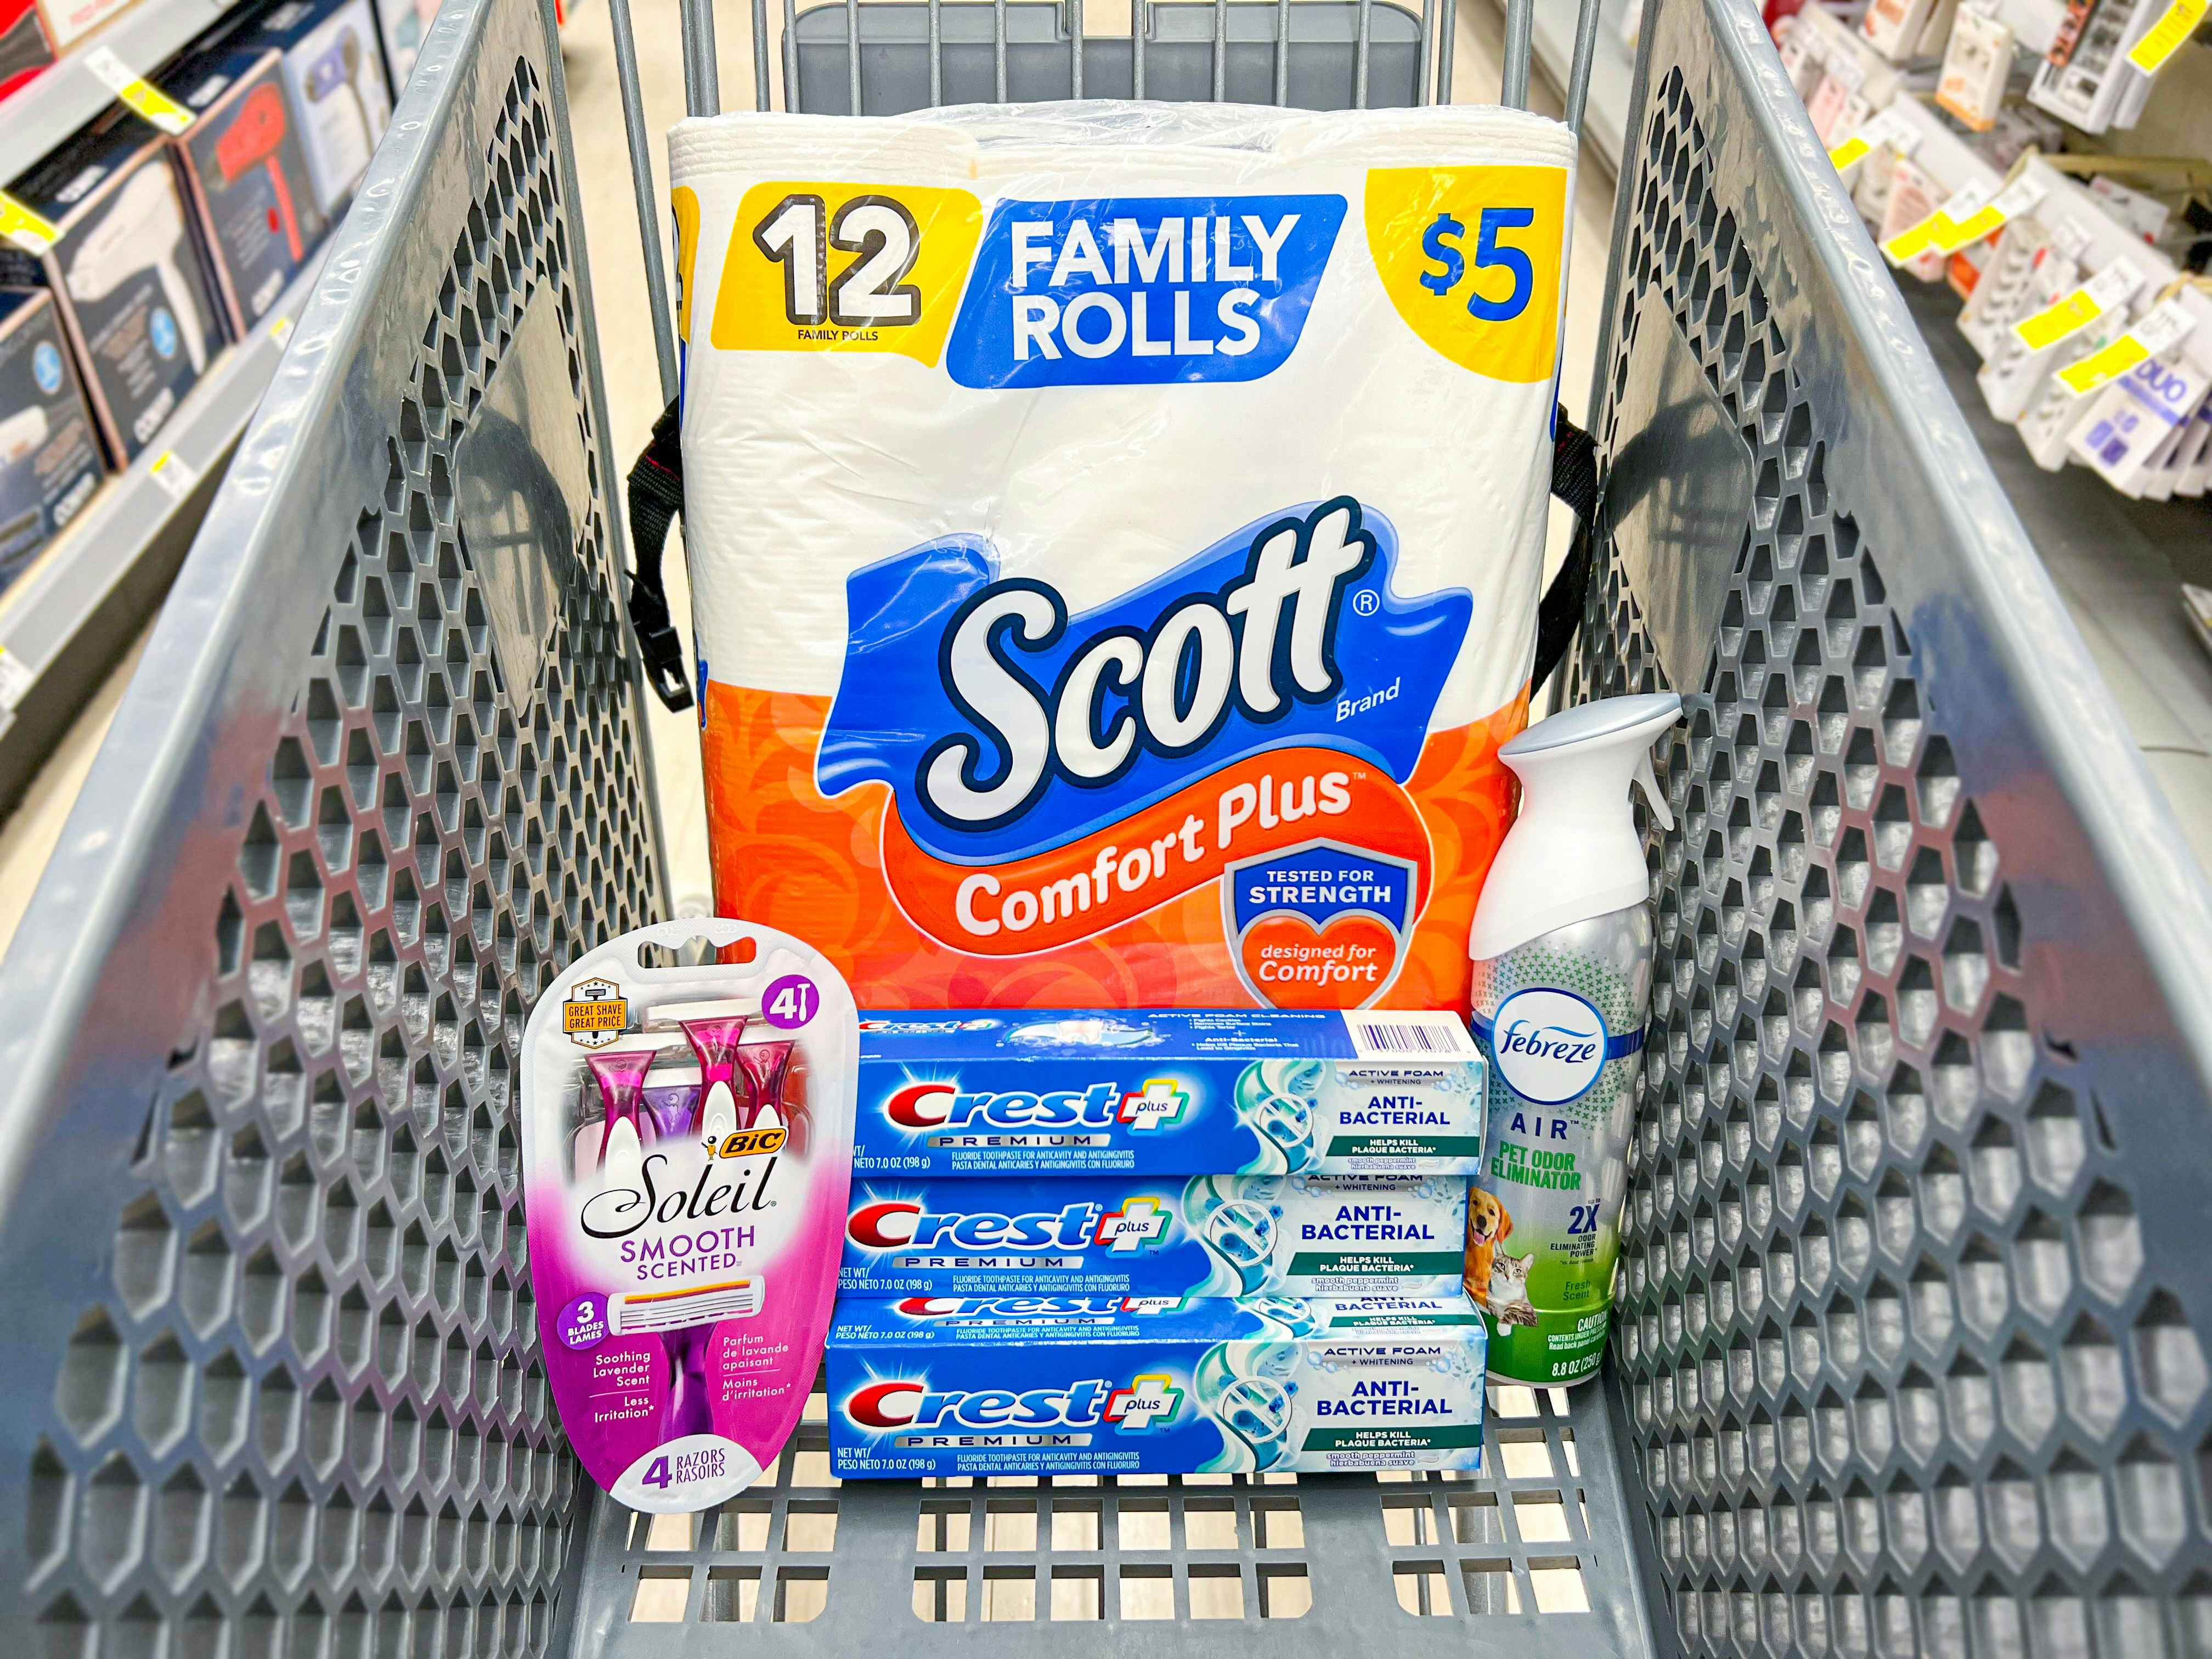 walgreens shopping cart with crest toothpaste, scott toilet paper, febreze, and bic razors